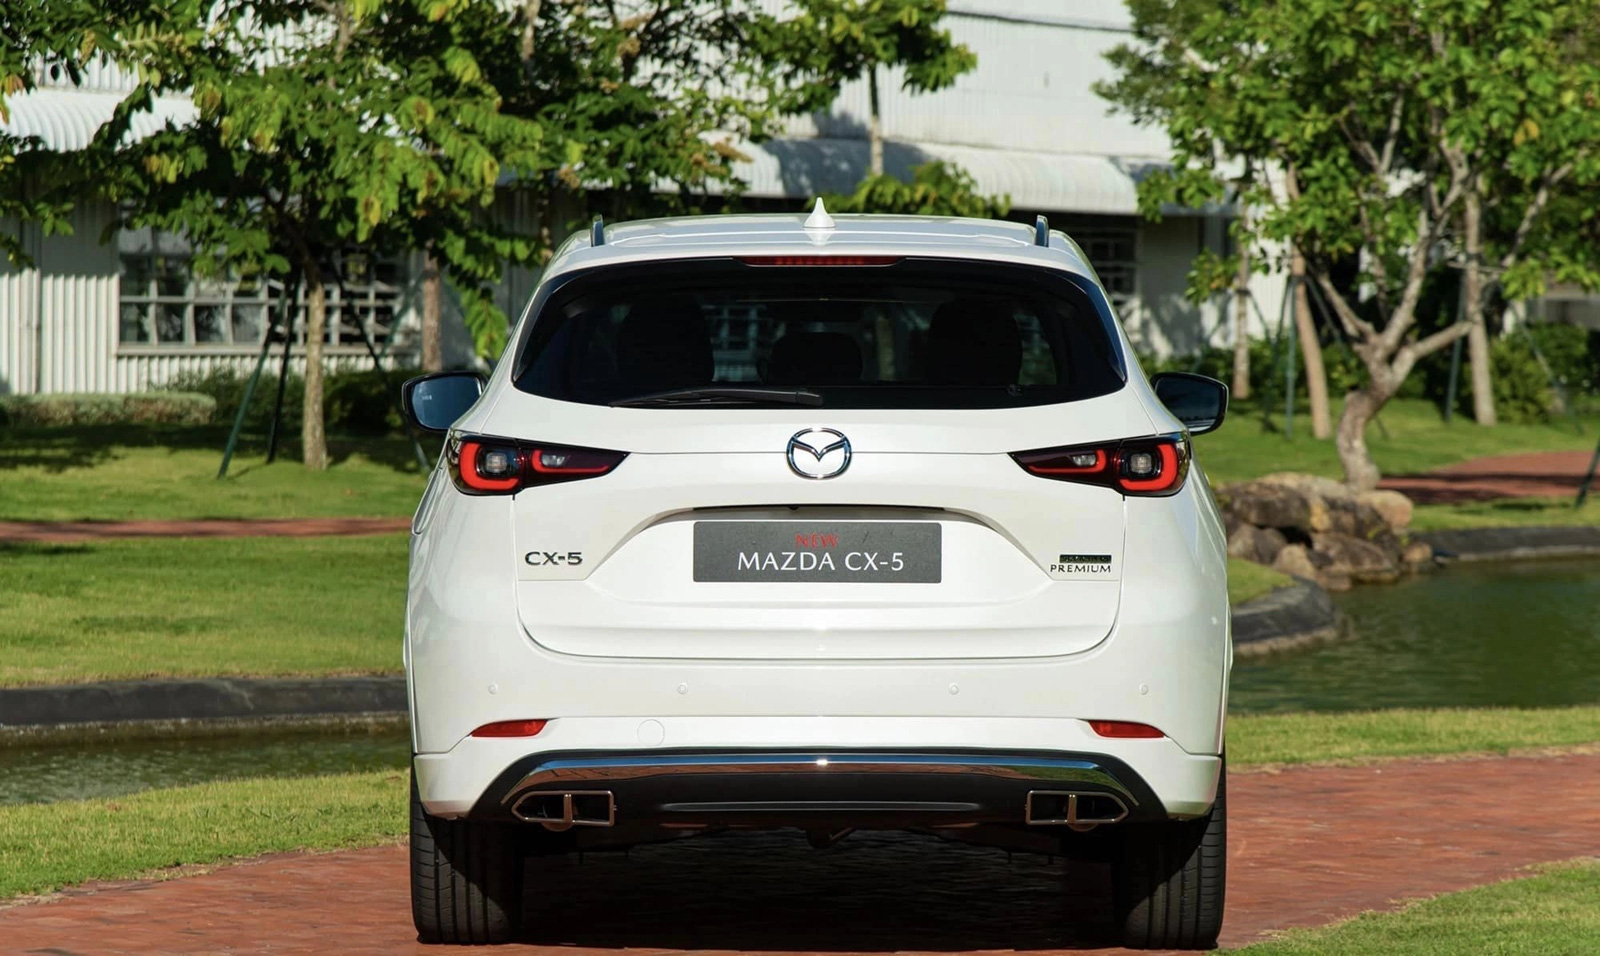 With the i-ActivSense package, the 2023 Mazda CX-5 Luxury has full blind spot warning, cross-traffic warning when reversing, lane departure warning and lane keeping assist, smart brake support in the city and on throttle.  Automatically optimizes distance, automatic headlights/high beams and reminds driver to concentrate, same as Premium version.  In particular, automatic brake support, automatic adaptive throttle and features reminding the driver to concentrate are new features of the premium version compared to before - Photo: Mazda Dealer/Facebook